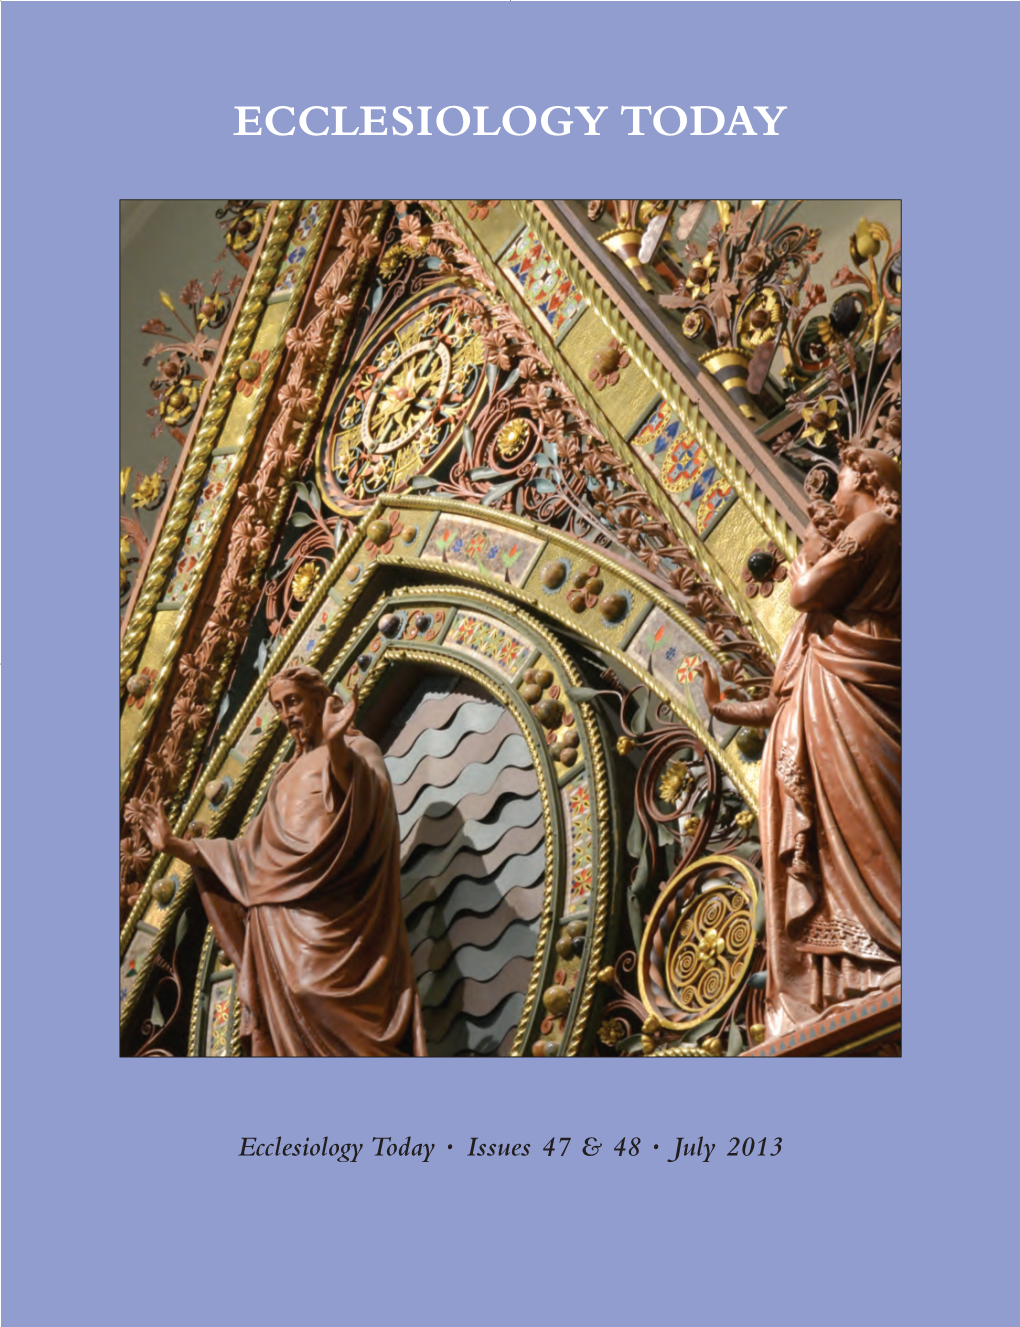 Ecclesiology Today No. 47 & 48 – July 2013